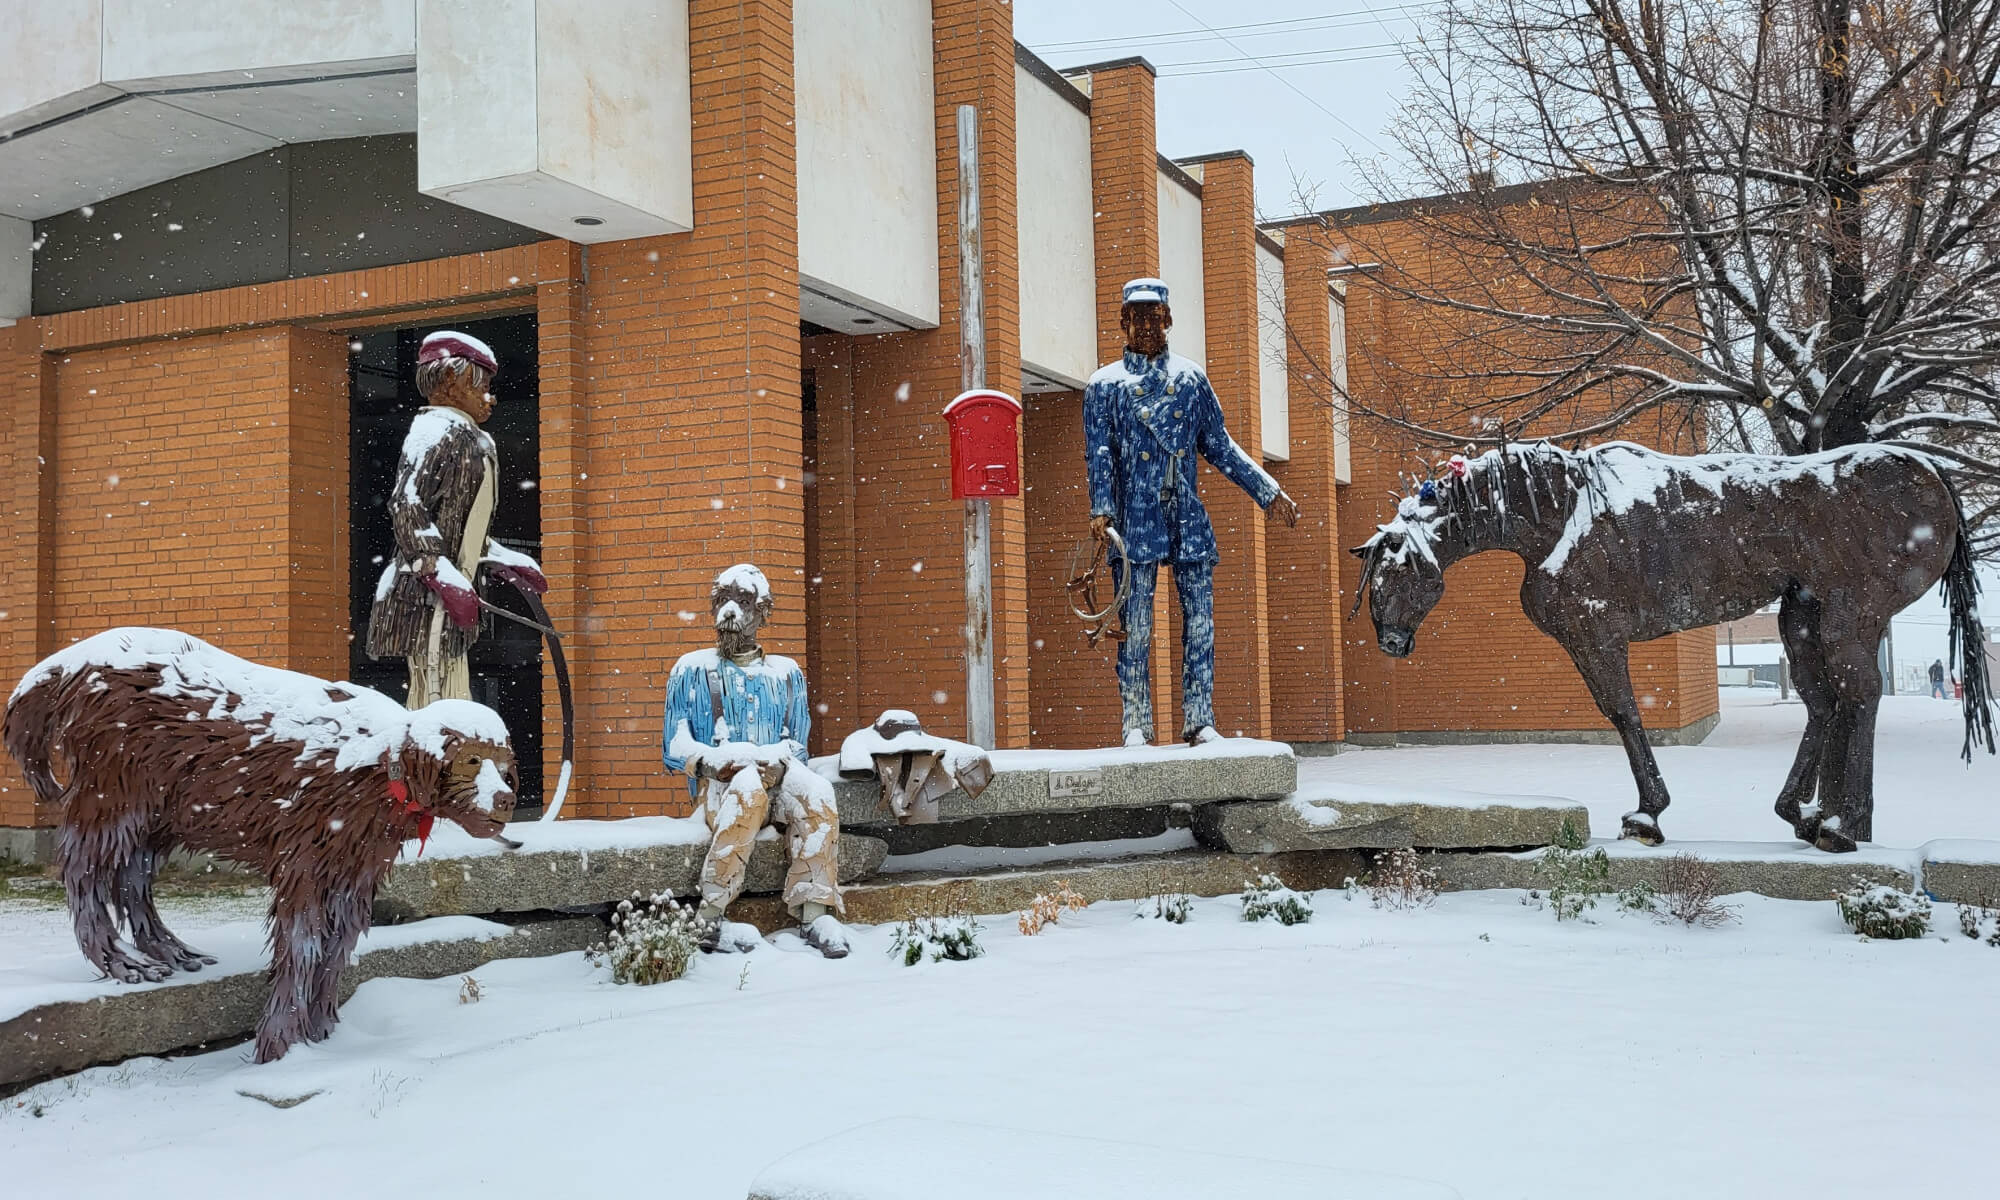 Jim Dolan sculpture for the Memorial of the Great Warehouse Explosion of Butte 1895, covered with snow.